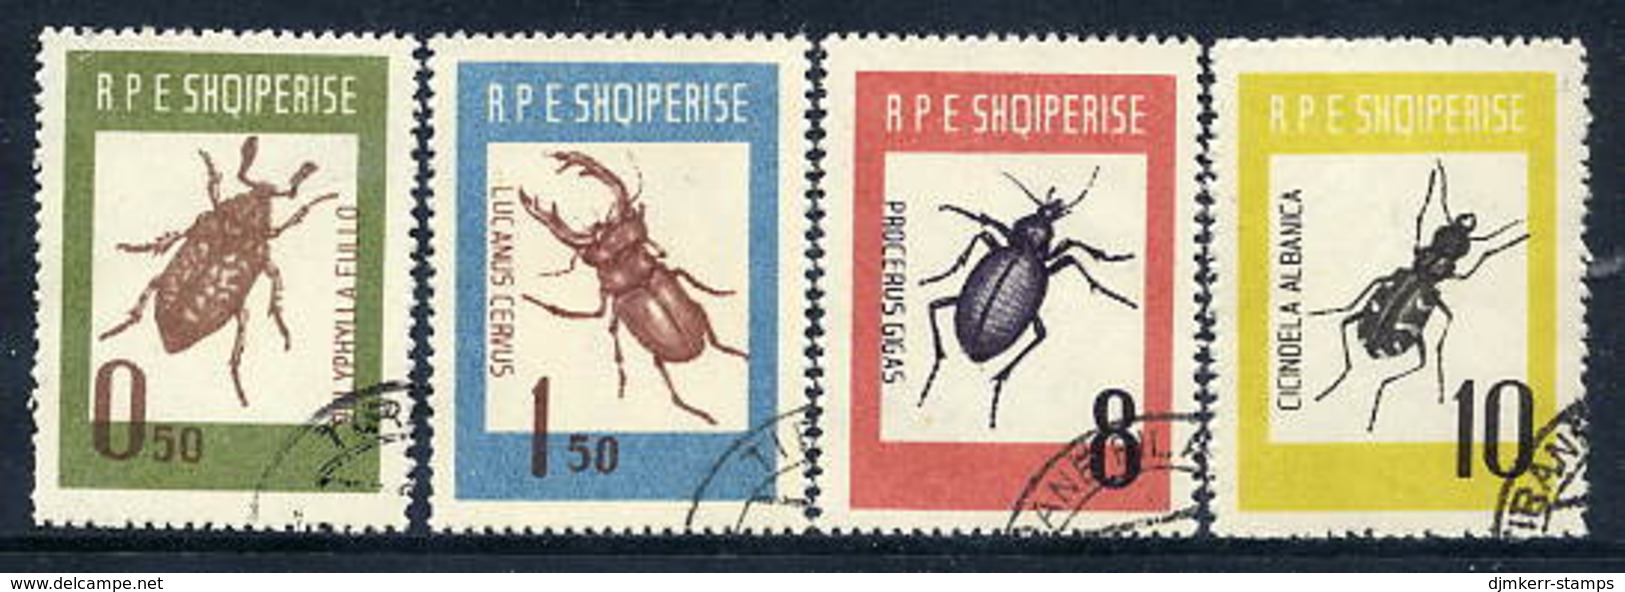 ALBANIA 1963 Insects Set Used.  Michel 735-38 - Albanien